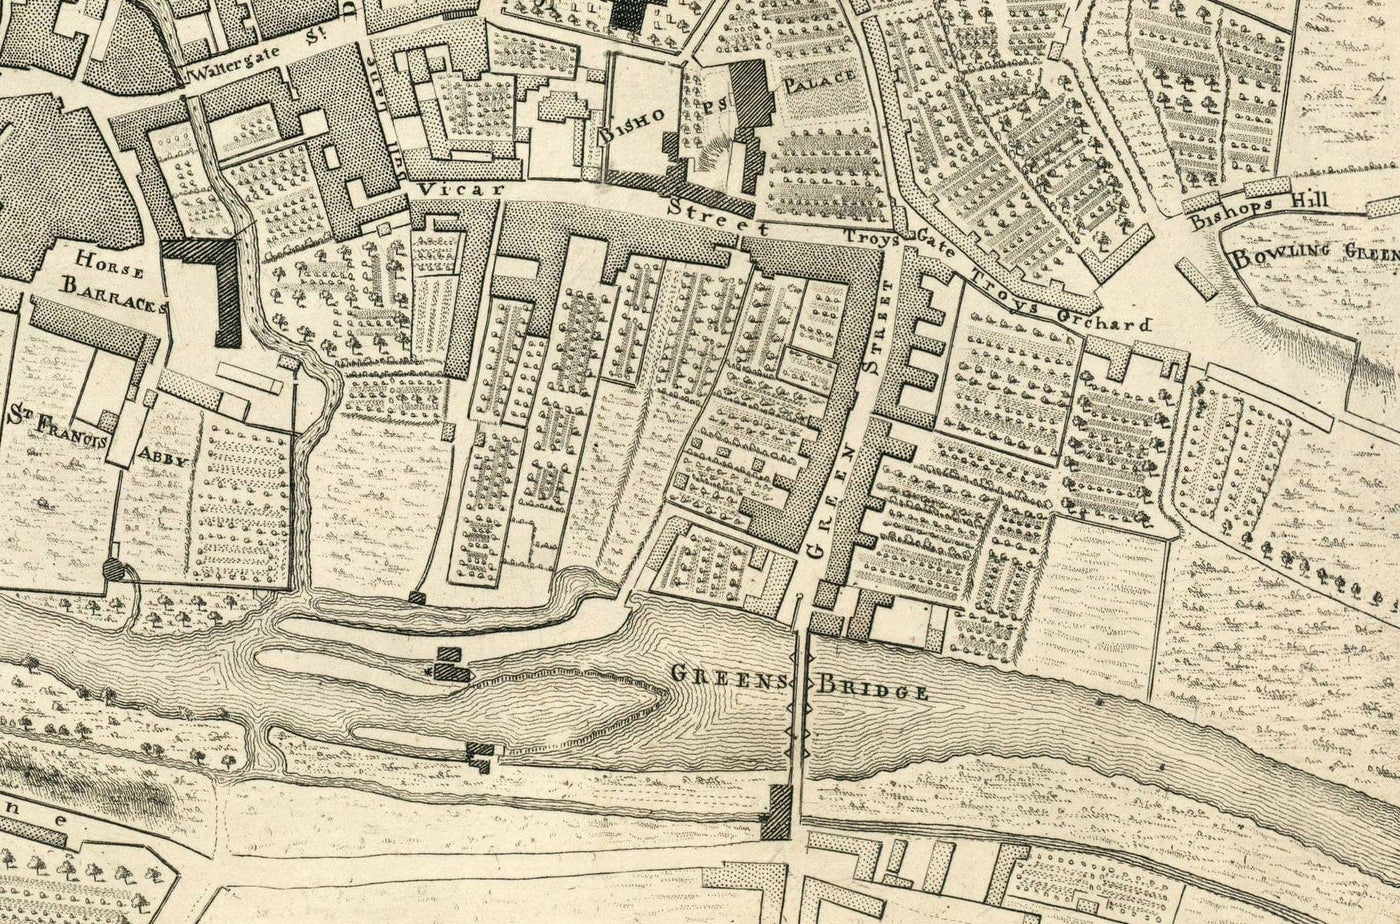 Old Map of Kilkenny by John Rocque in 1758 - River Nore, High Street, Gallow's Hill, Saint Patrick's Street